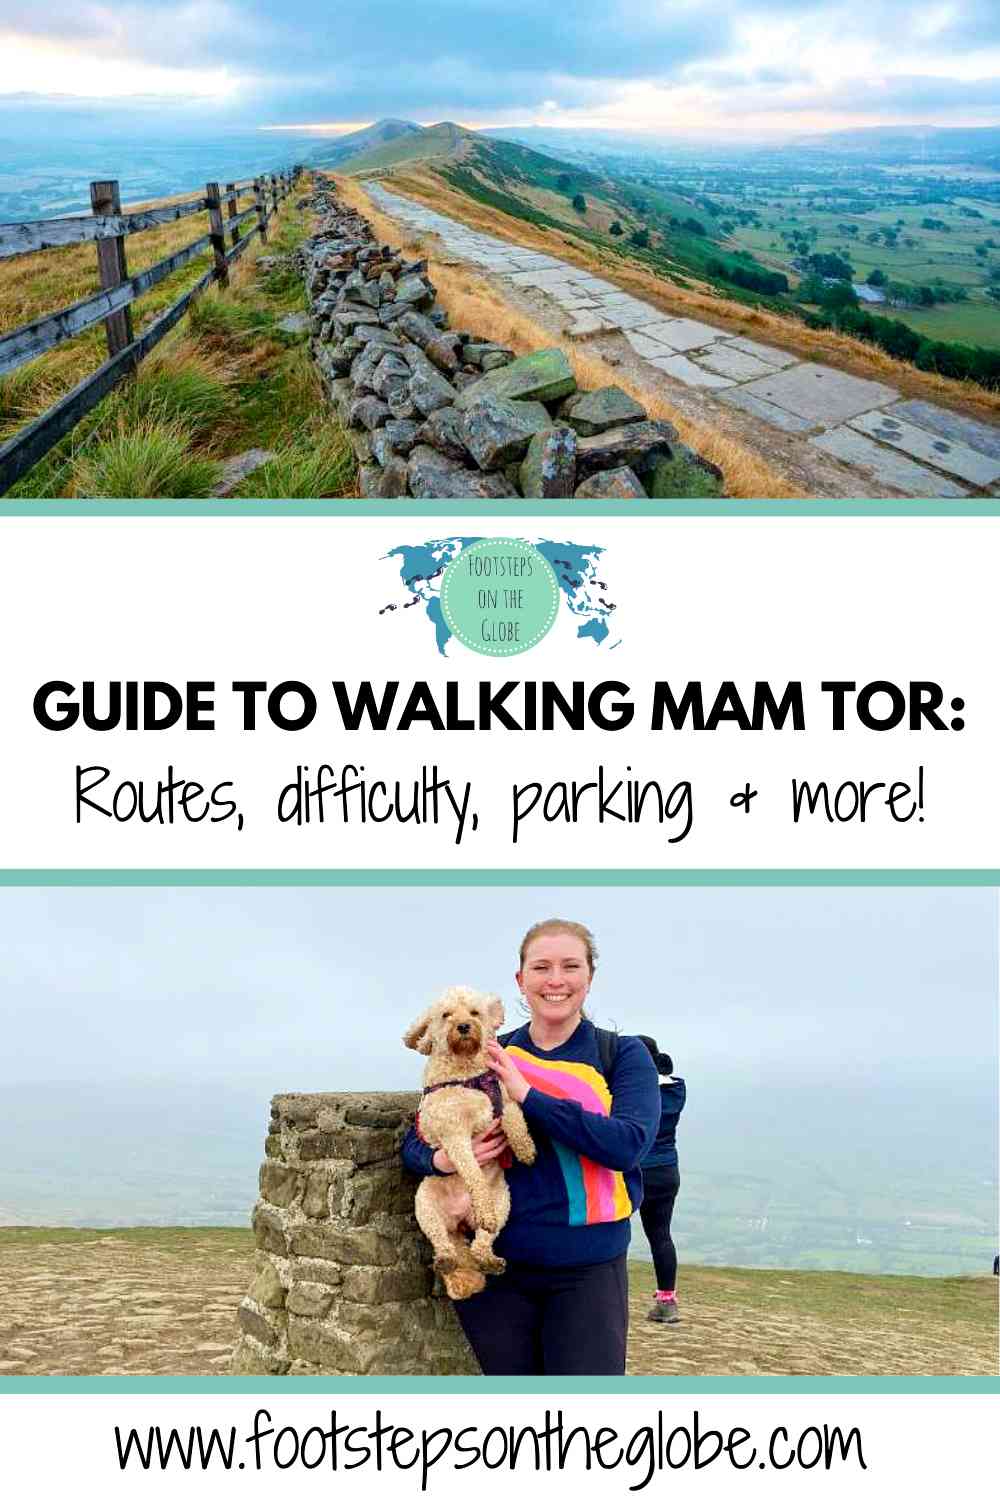 Pinterest image with a view of Mam Tor in the Peak District and a picture of Mel and her dog Lilly at the summit with the text: "Guide to walking Mam Tor: Routes, difficulty, parking and more!"